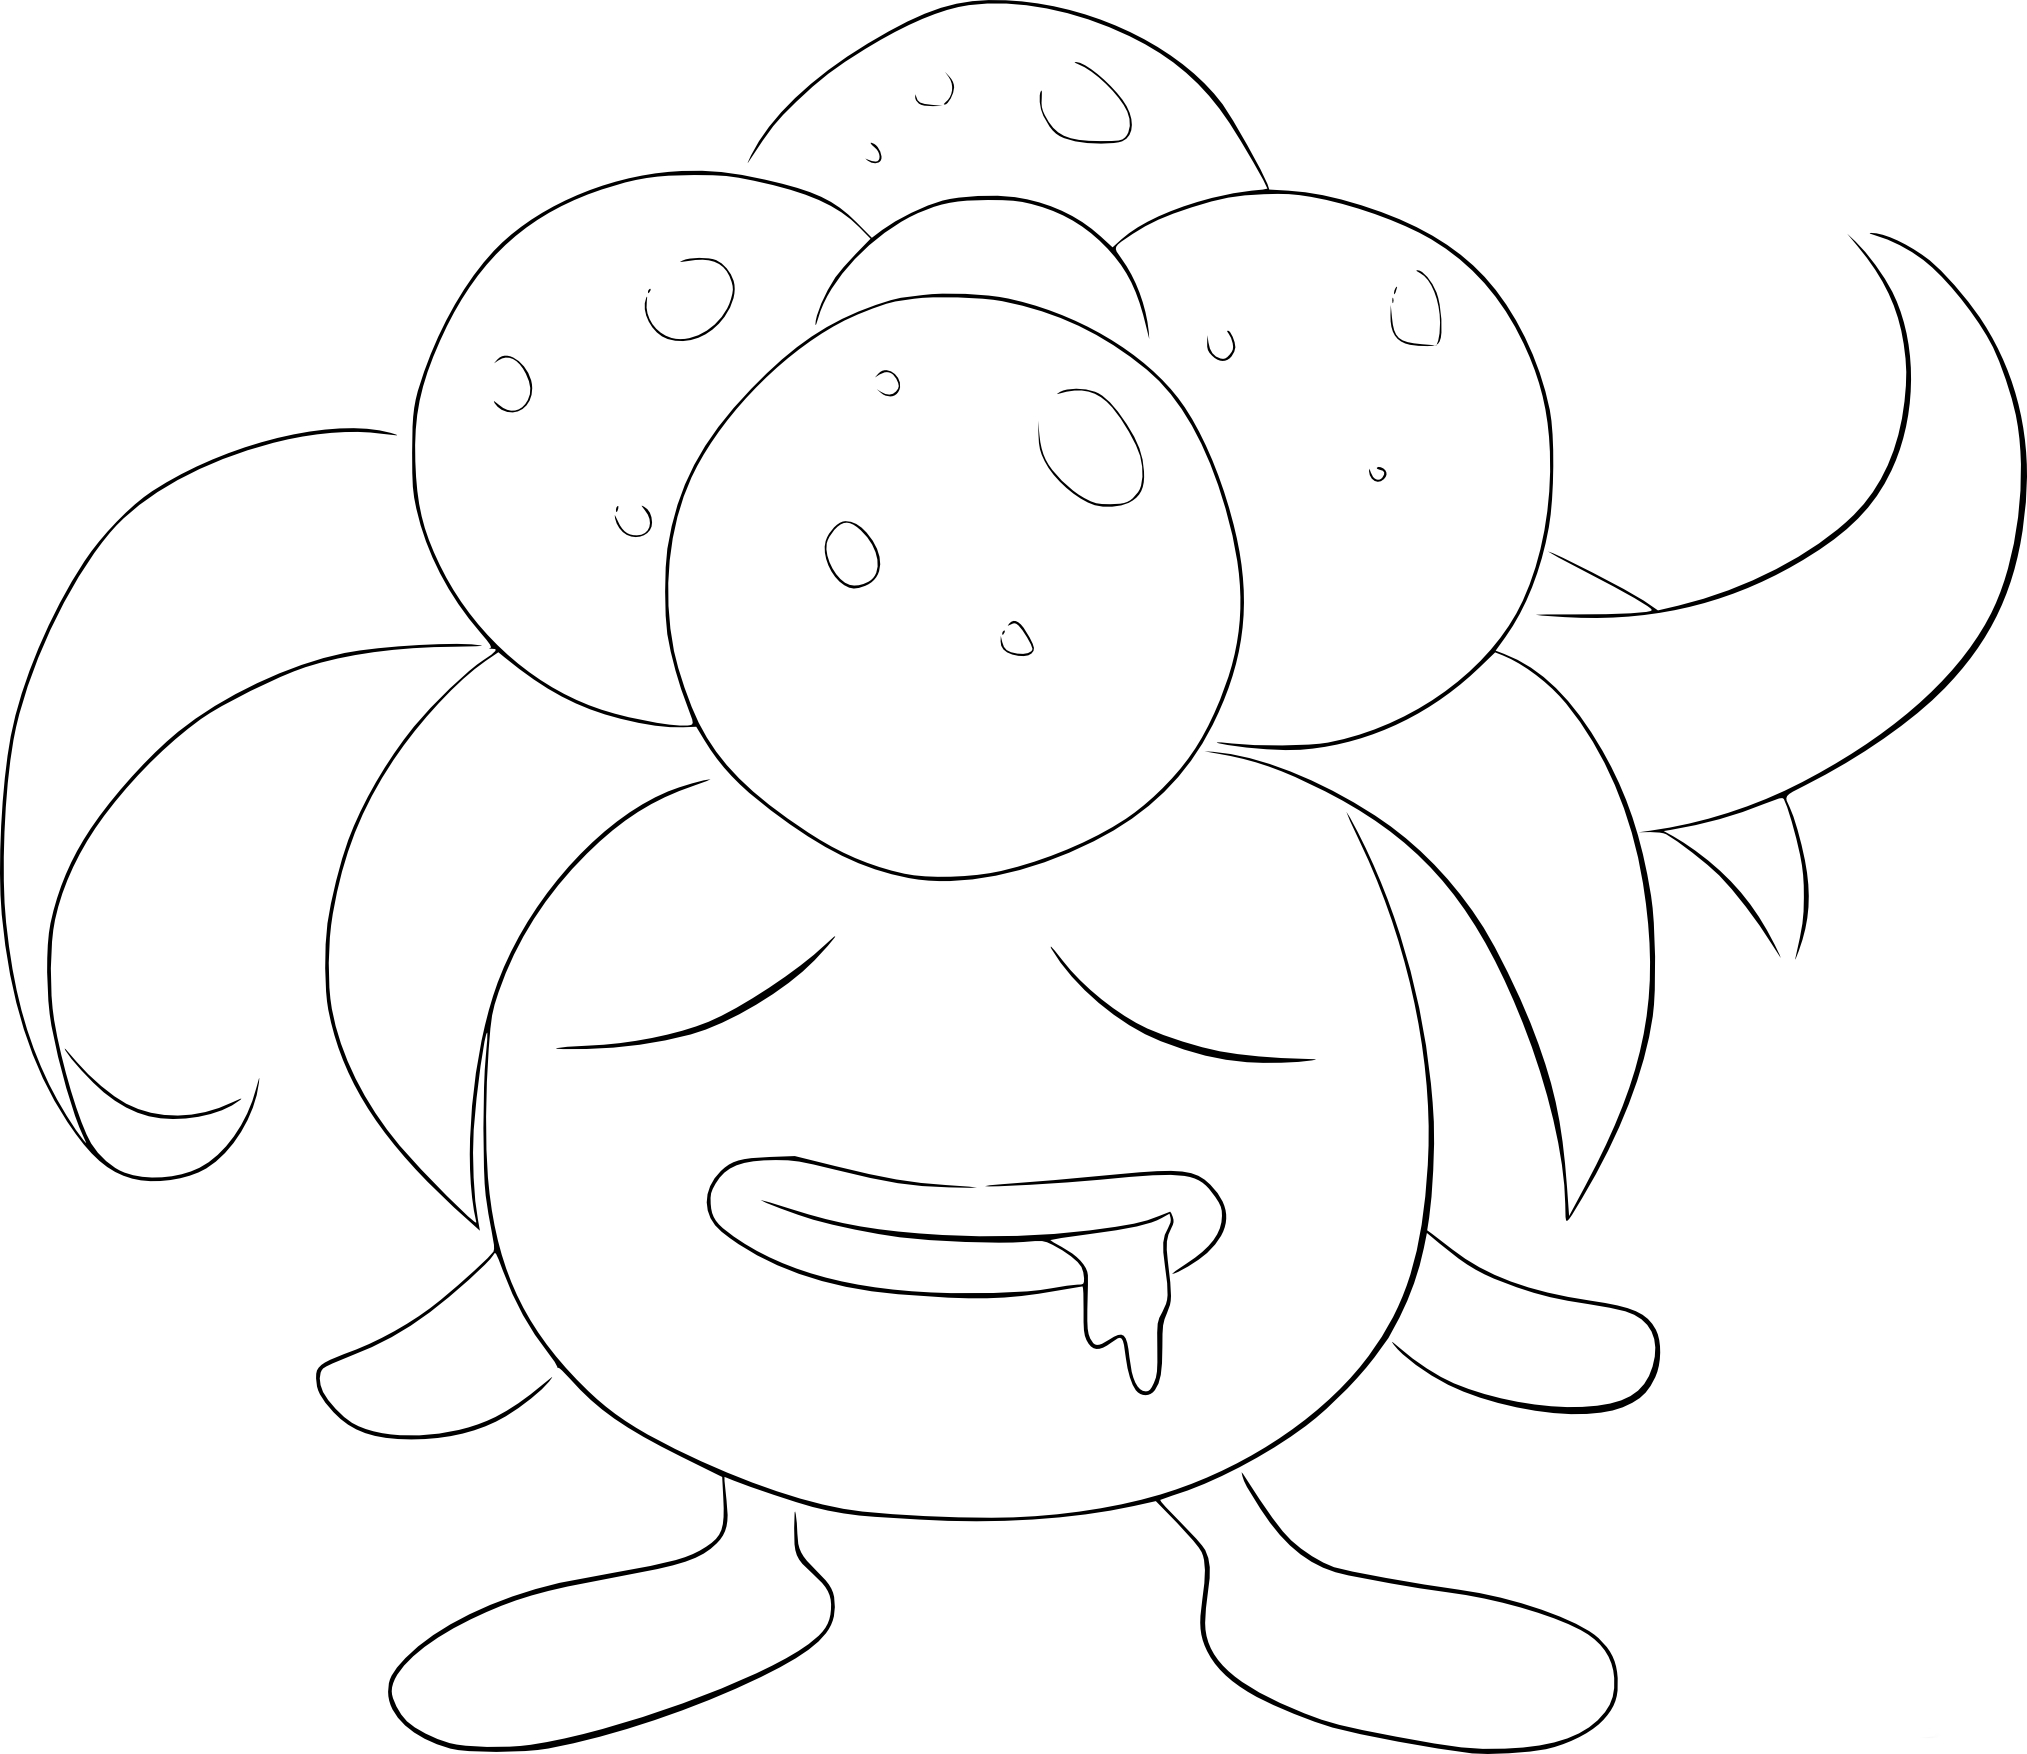 Gloom Pokemon coloring page